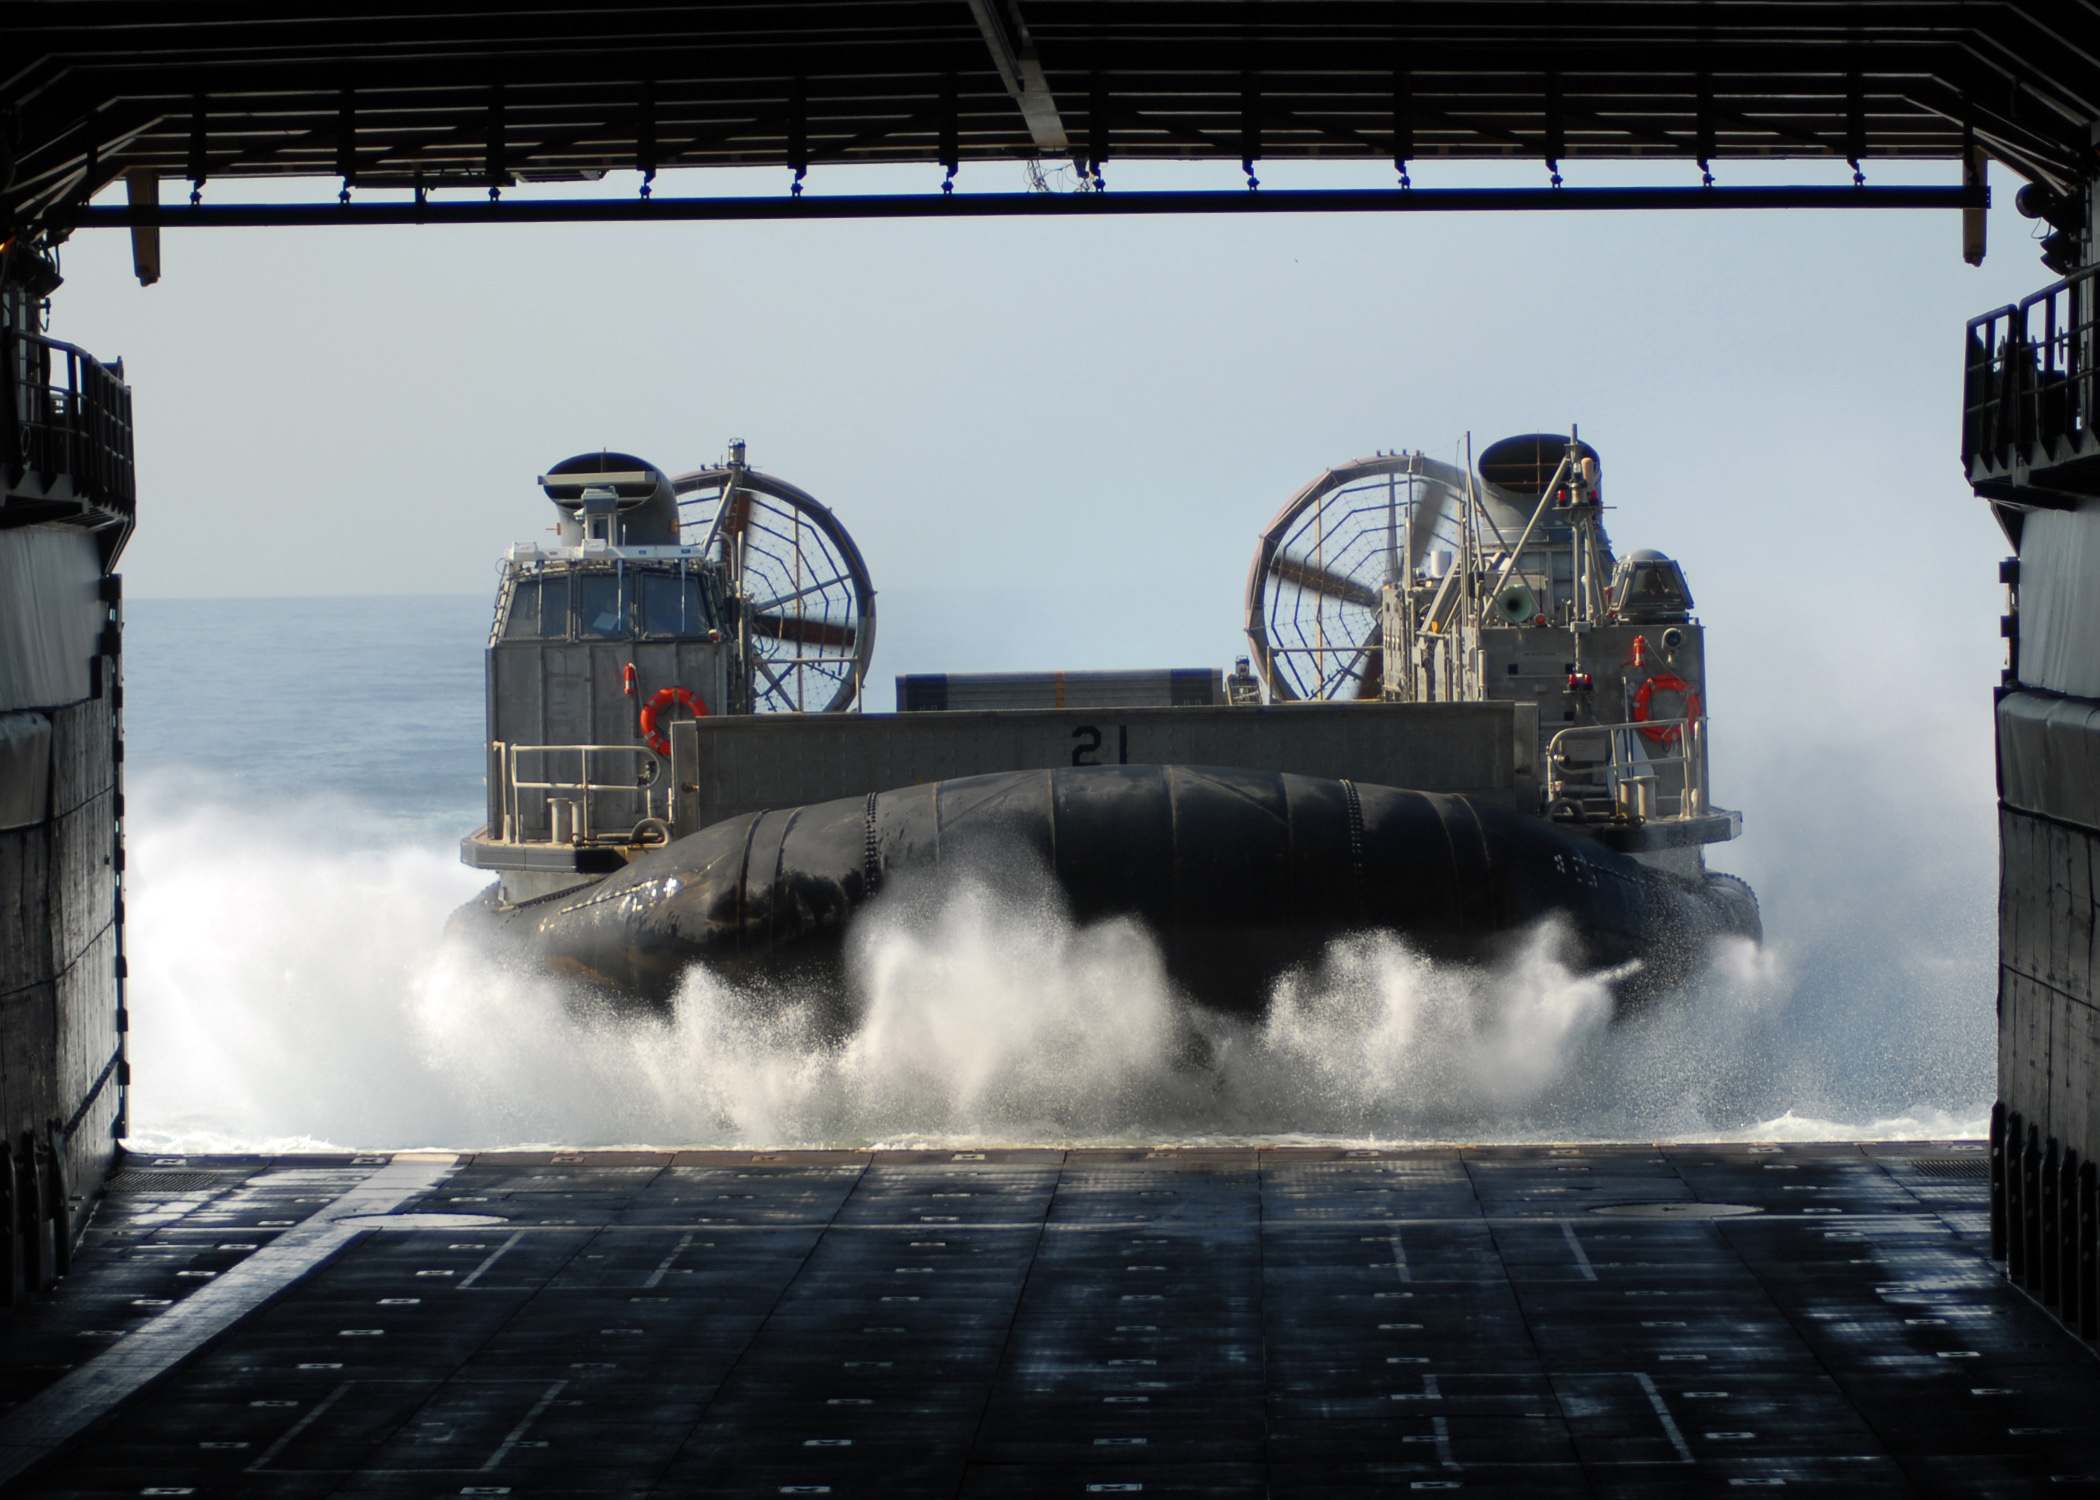 US Navy 100304-N-6692A-032 Landing Craft Air Cushion (LCAC) 21 assigned to Assault Craft Unit (ACU) 5, enters the well deck of the amphibious dock landing ship USS Harpers Ferry (LSD 49) d